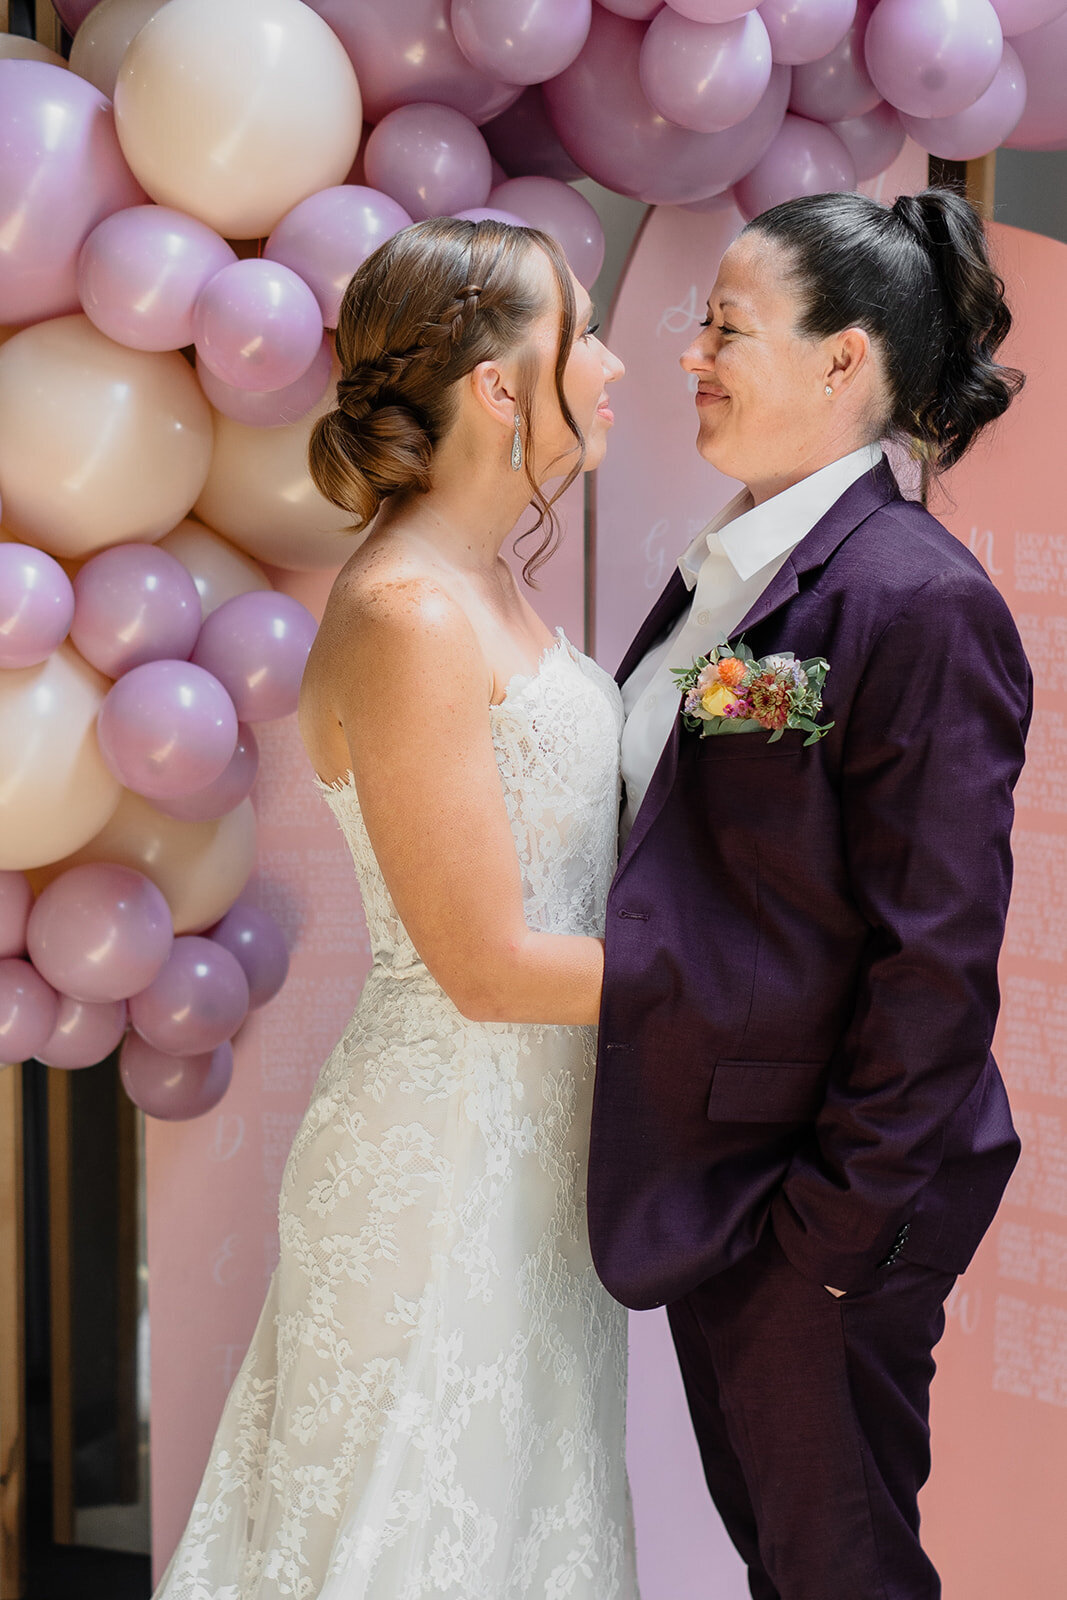 couple staring at each other in front of a balloon garland